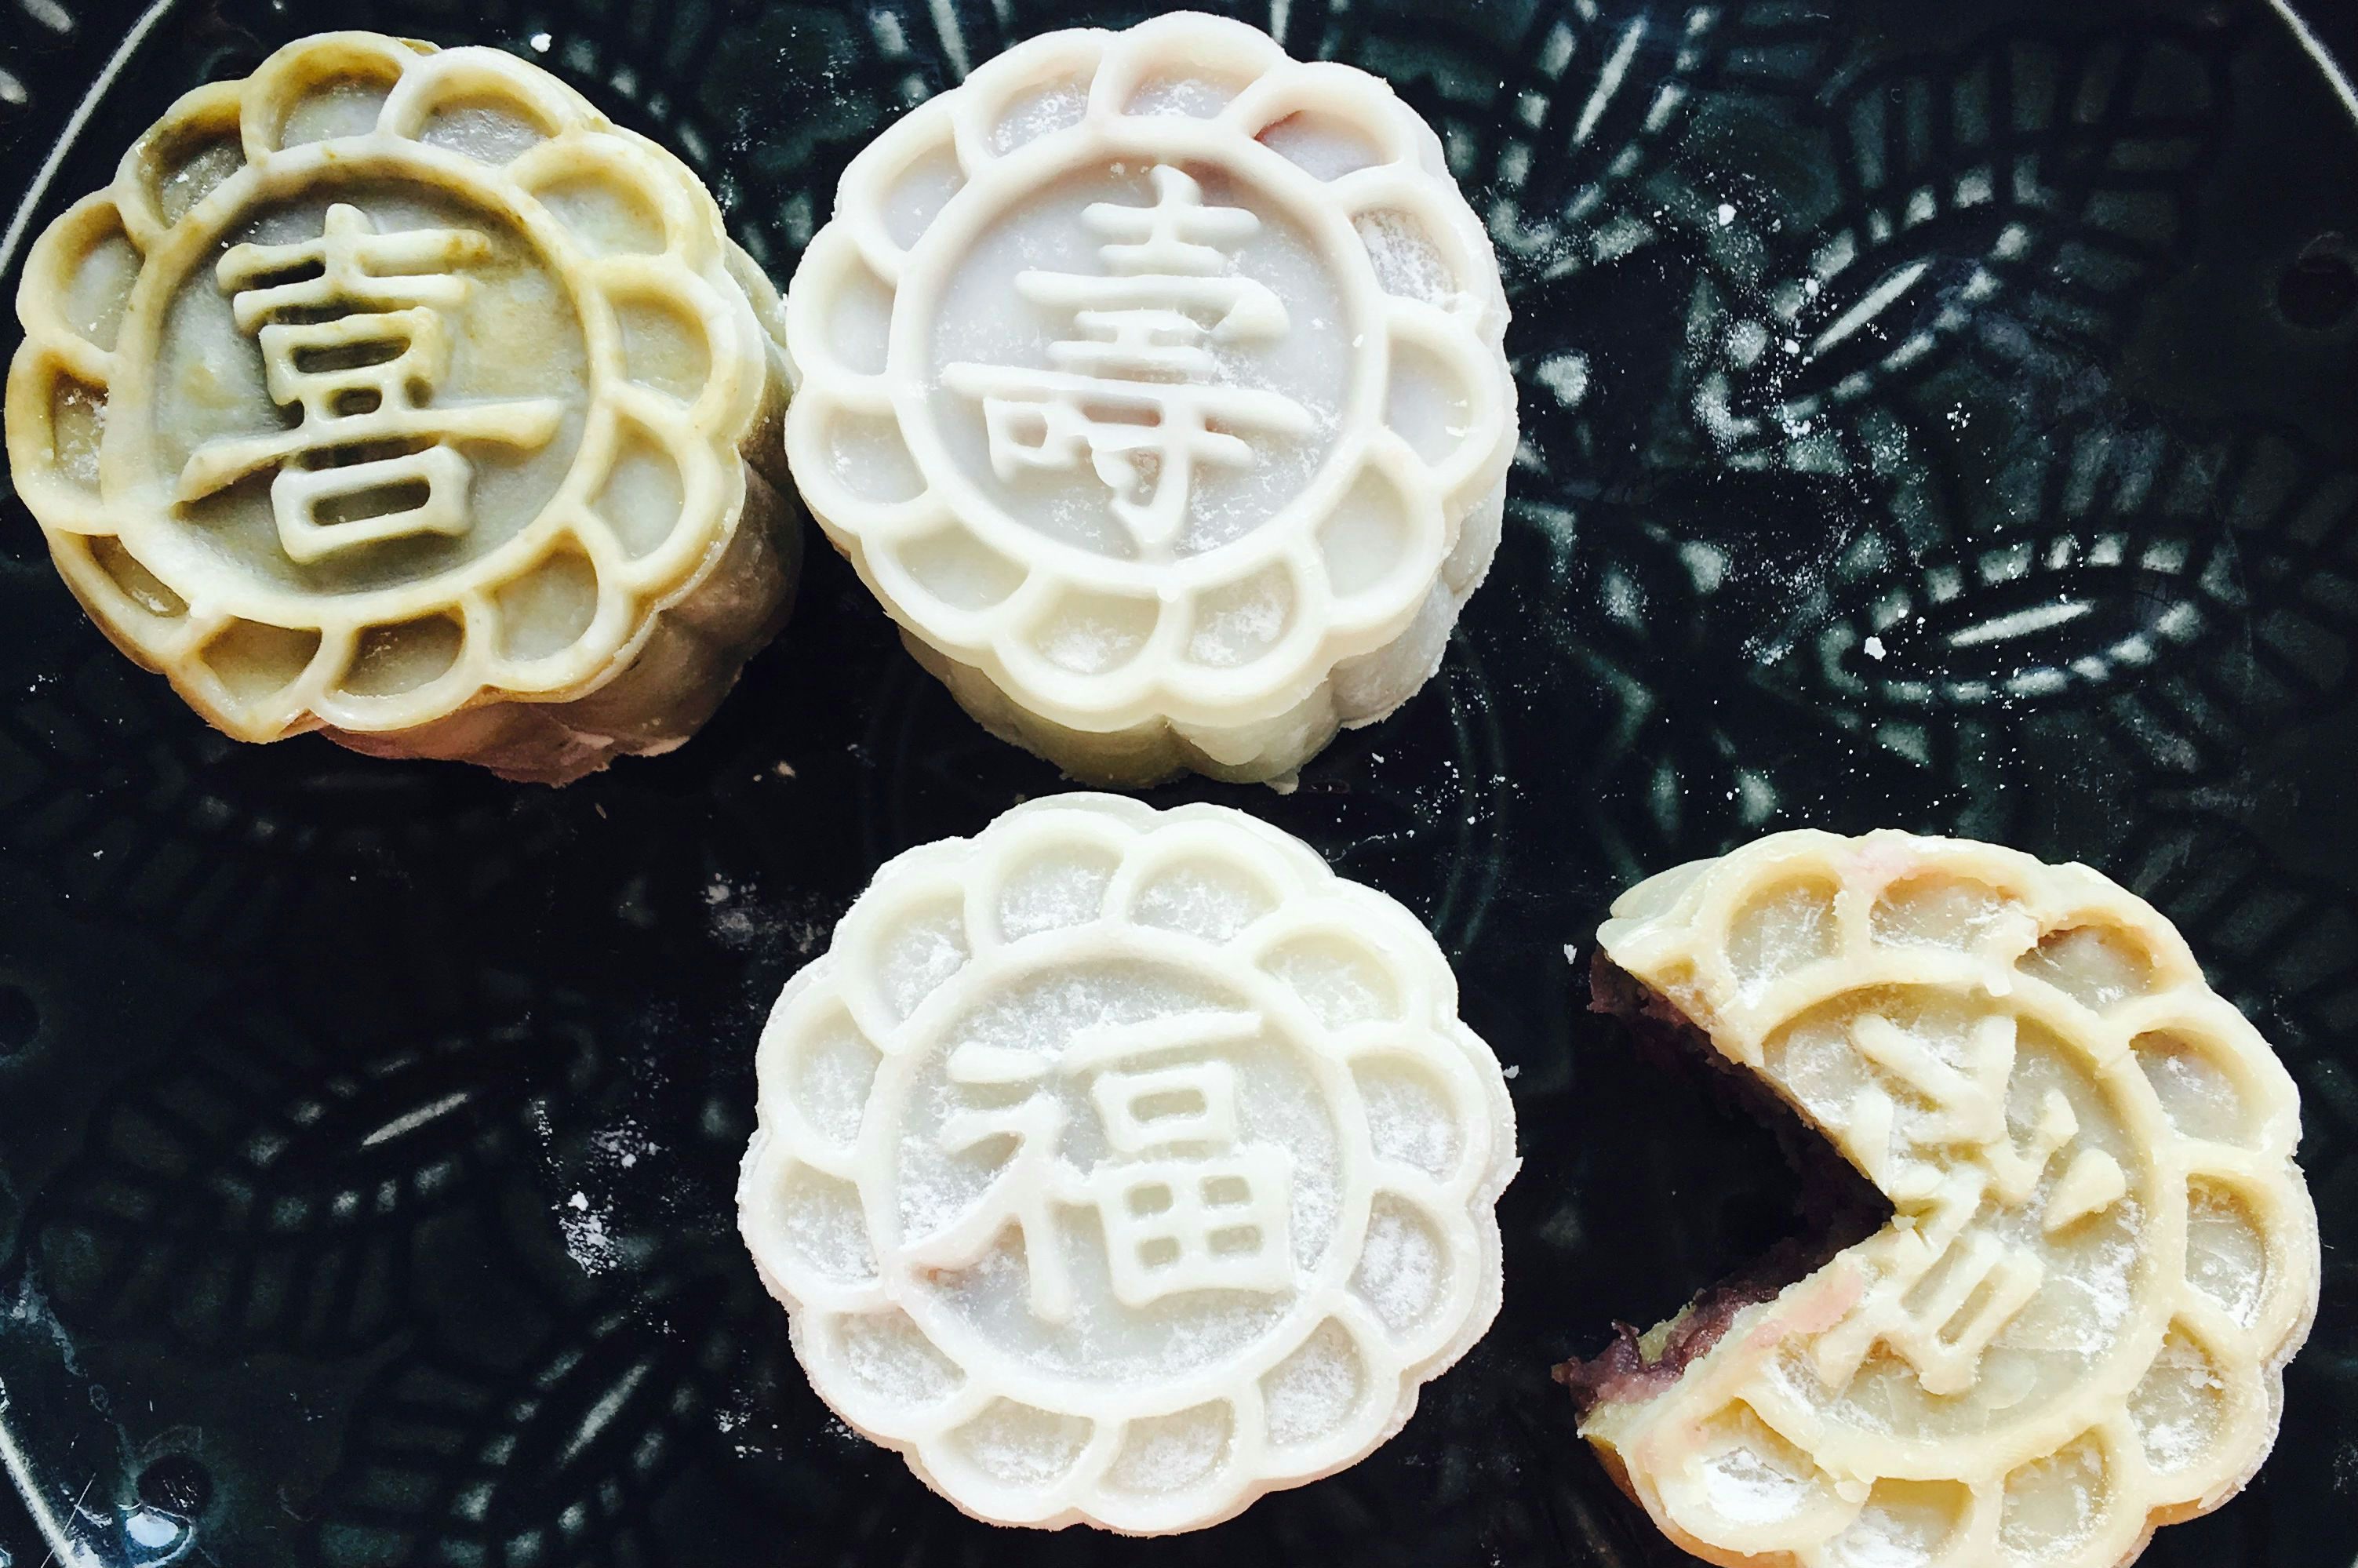 China’s Health and Wellness Craze Fuels Demand for Low-Cal Mooncakes